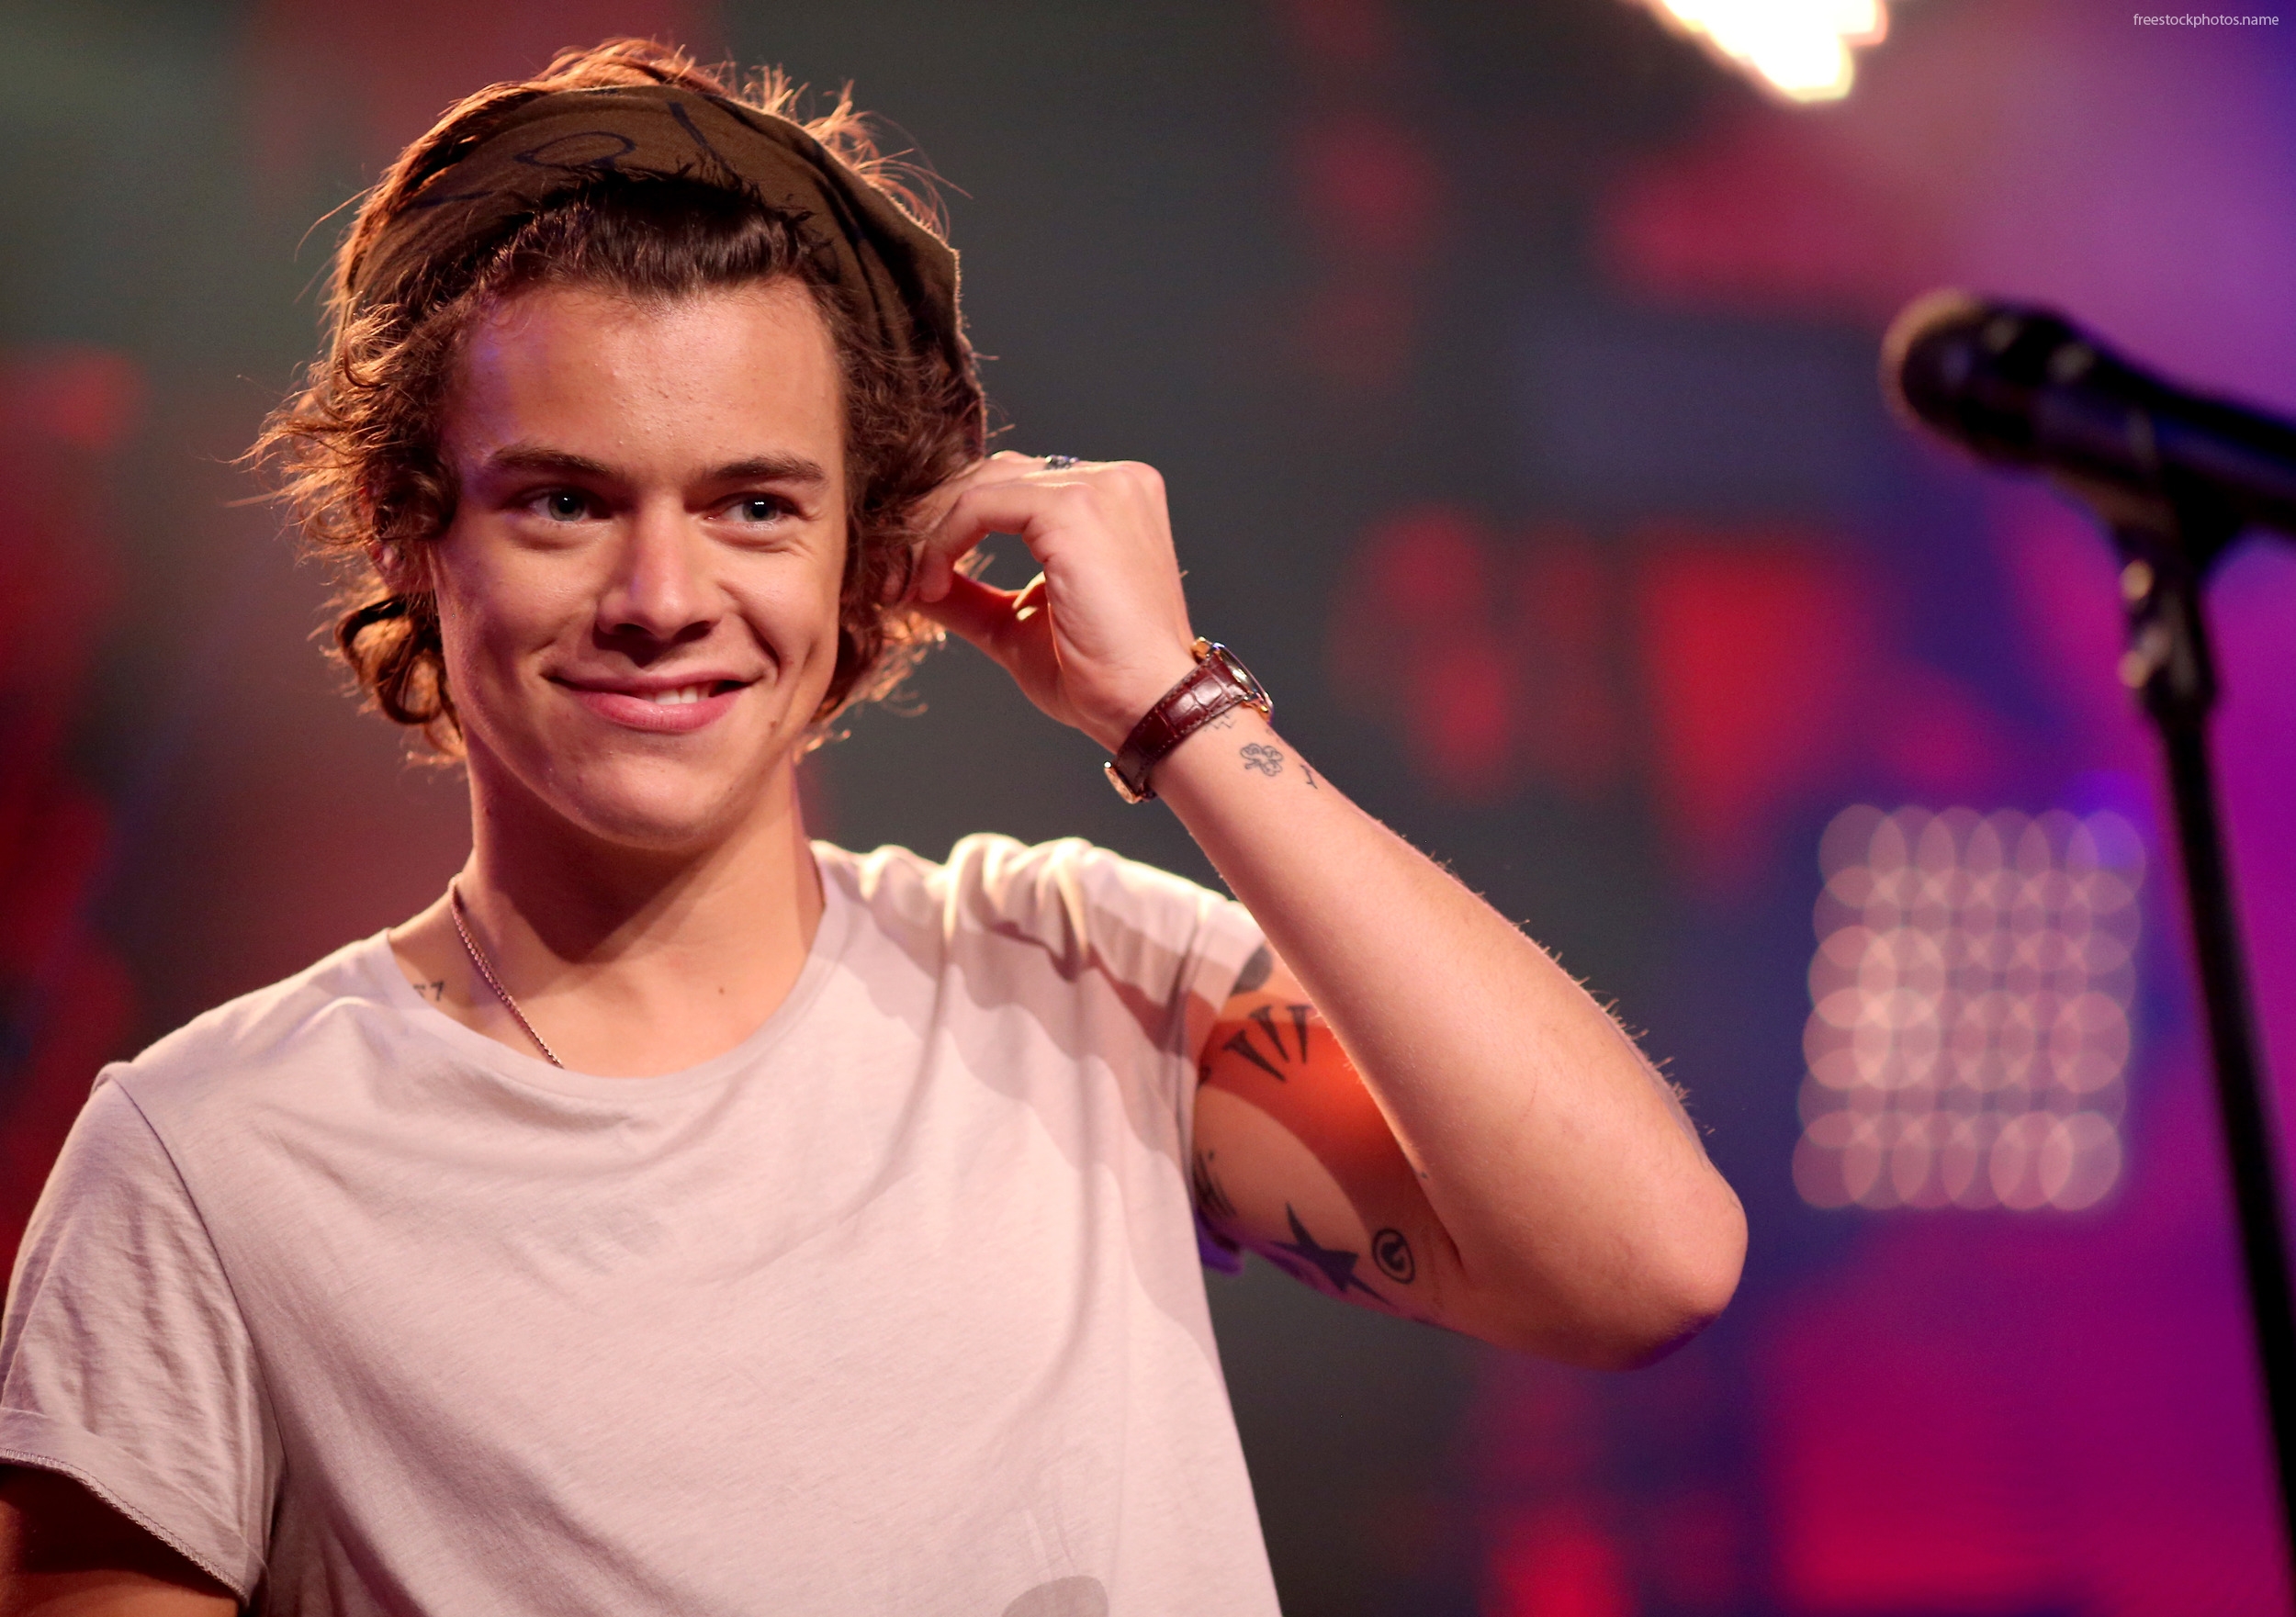 Download Stock Photos of harry styles 2014 wallpaper images